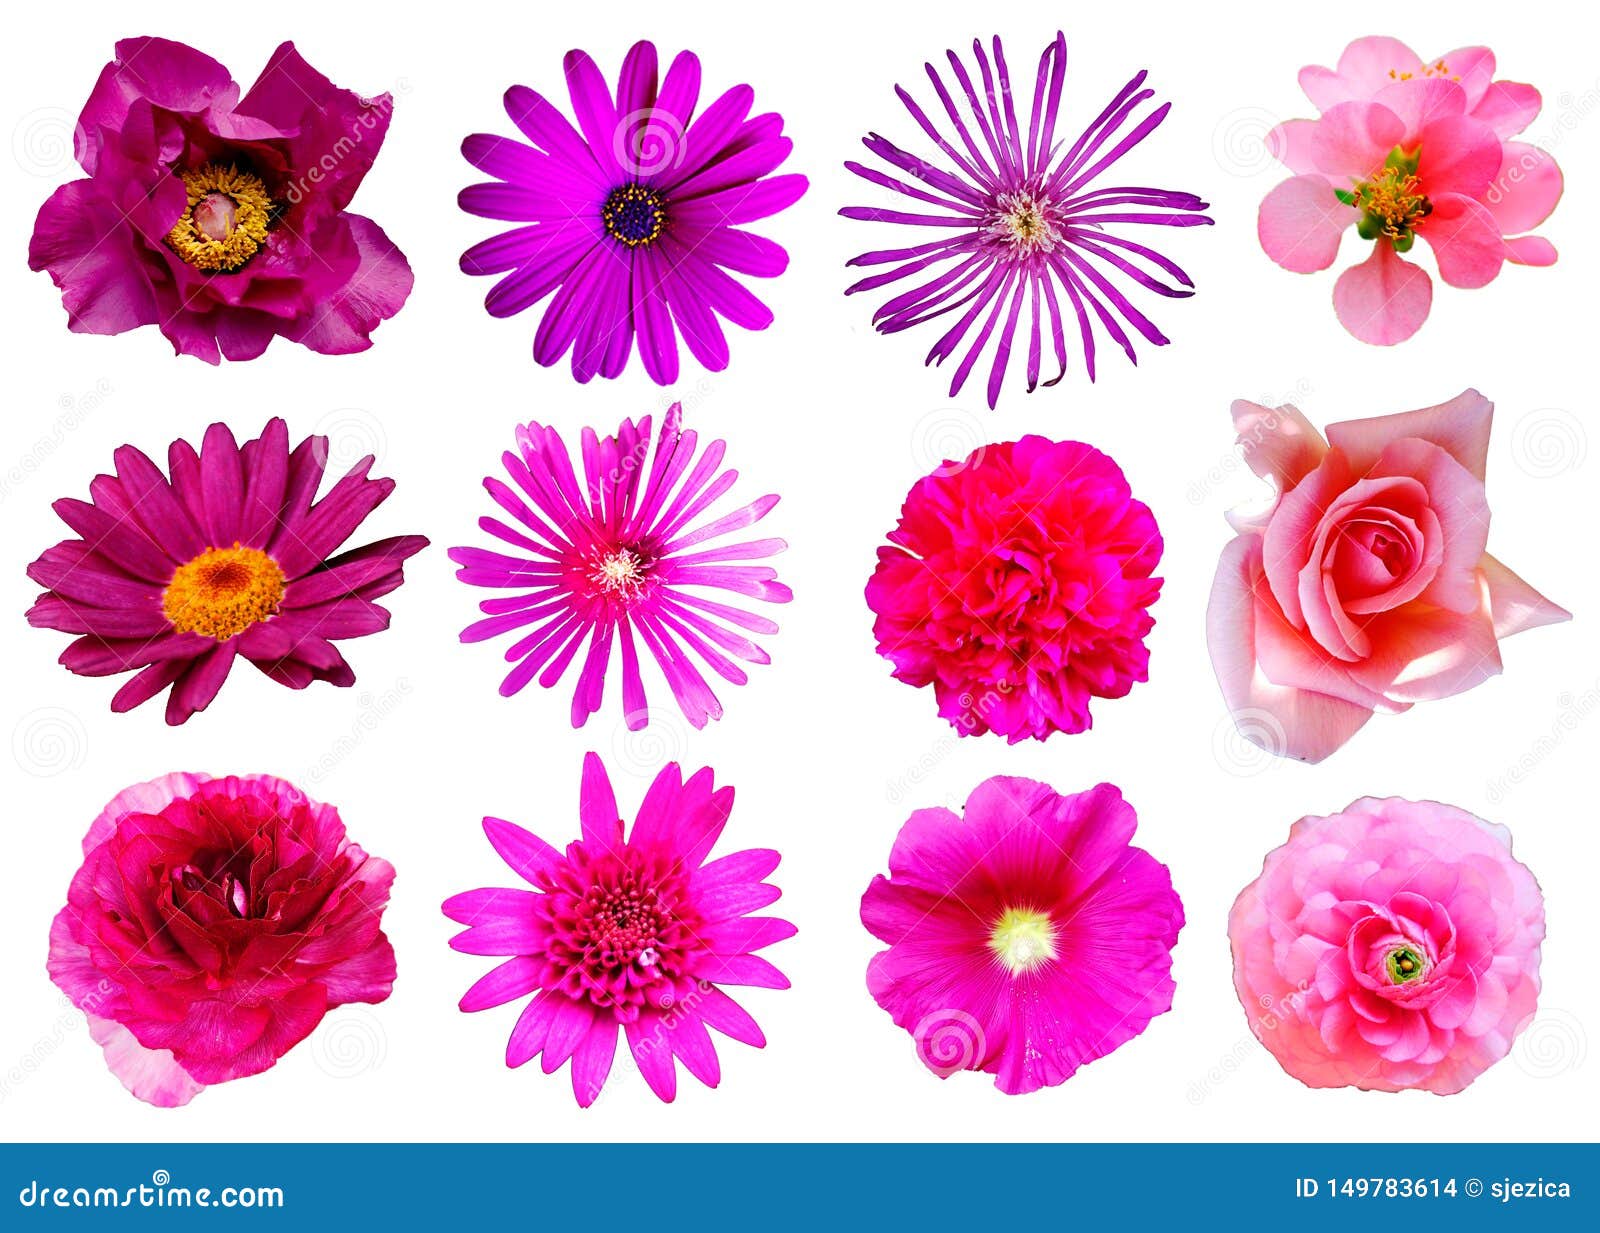 1 Floral Design Png Photos Free Royalty Free Stock Photos From Dreamstime